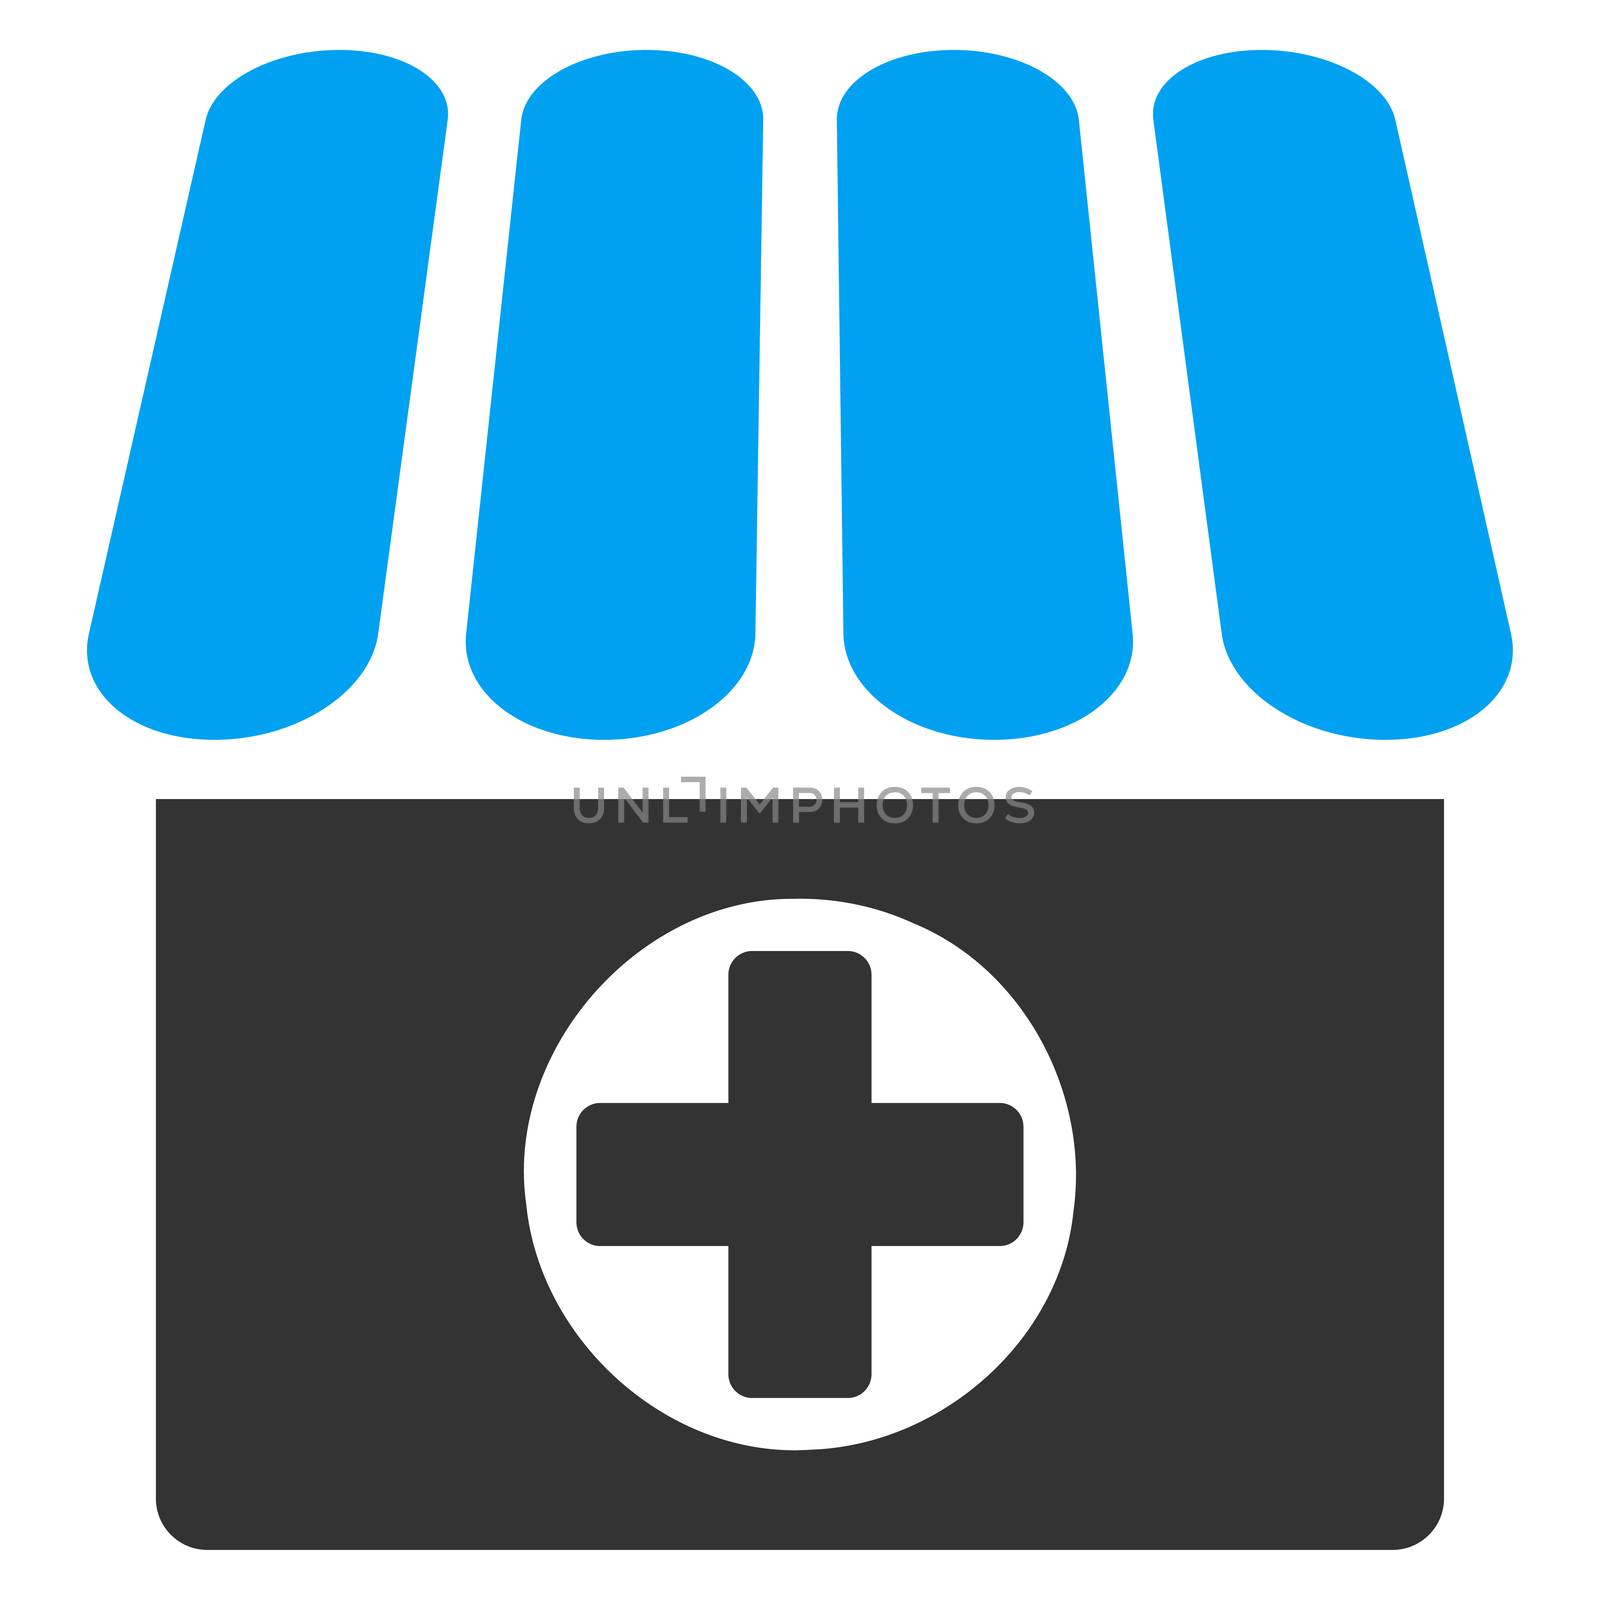 Drugstore icon from Business Bicolor Set by ahasoft